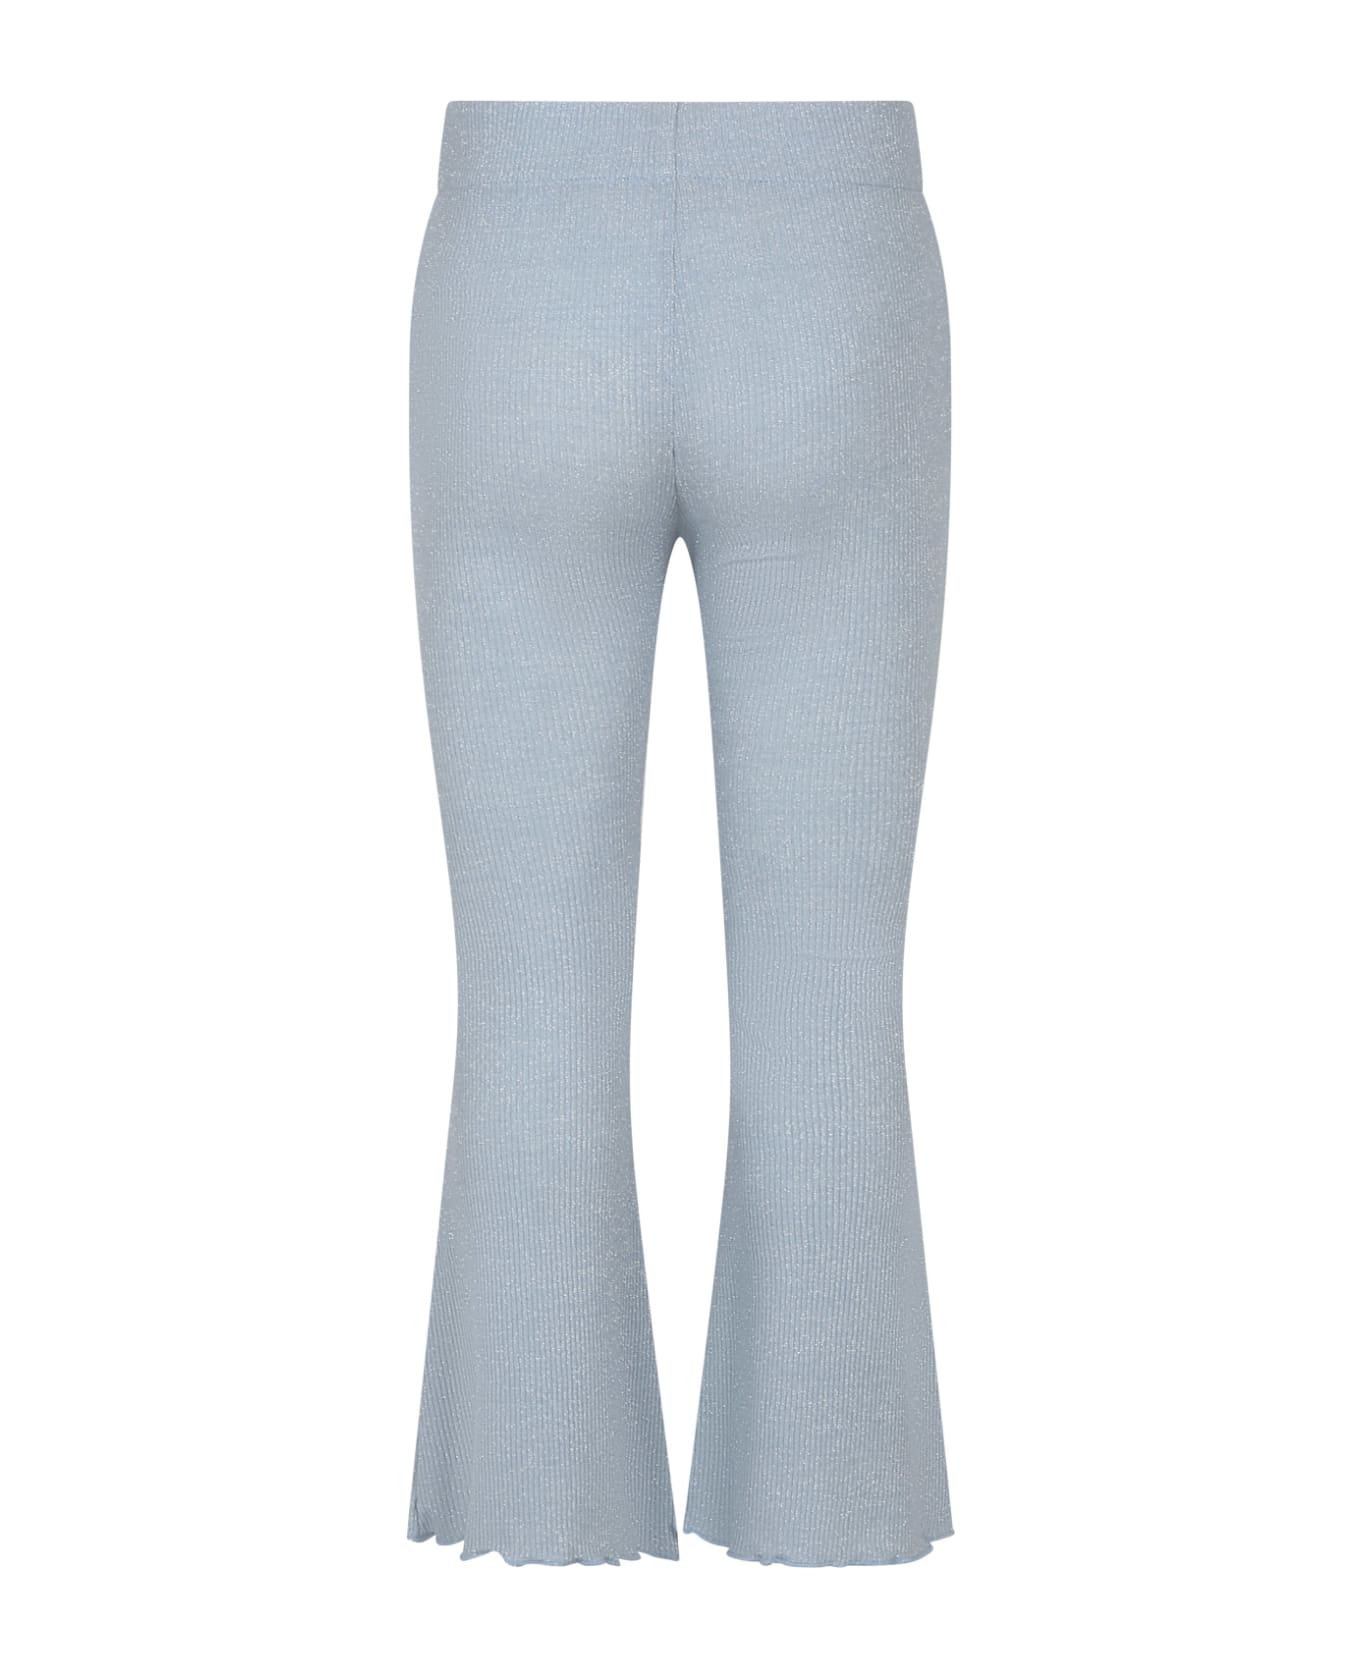 Caffe' d'Orzo Light Blue Trousers For Girl With Lurex - Light Blue